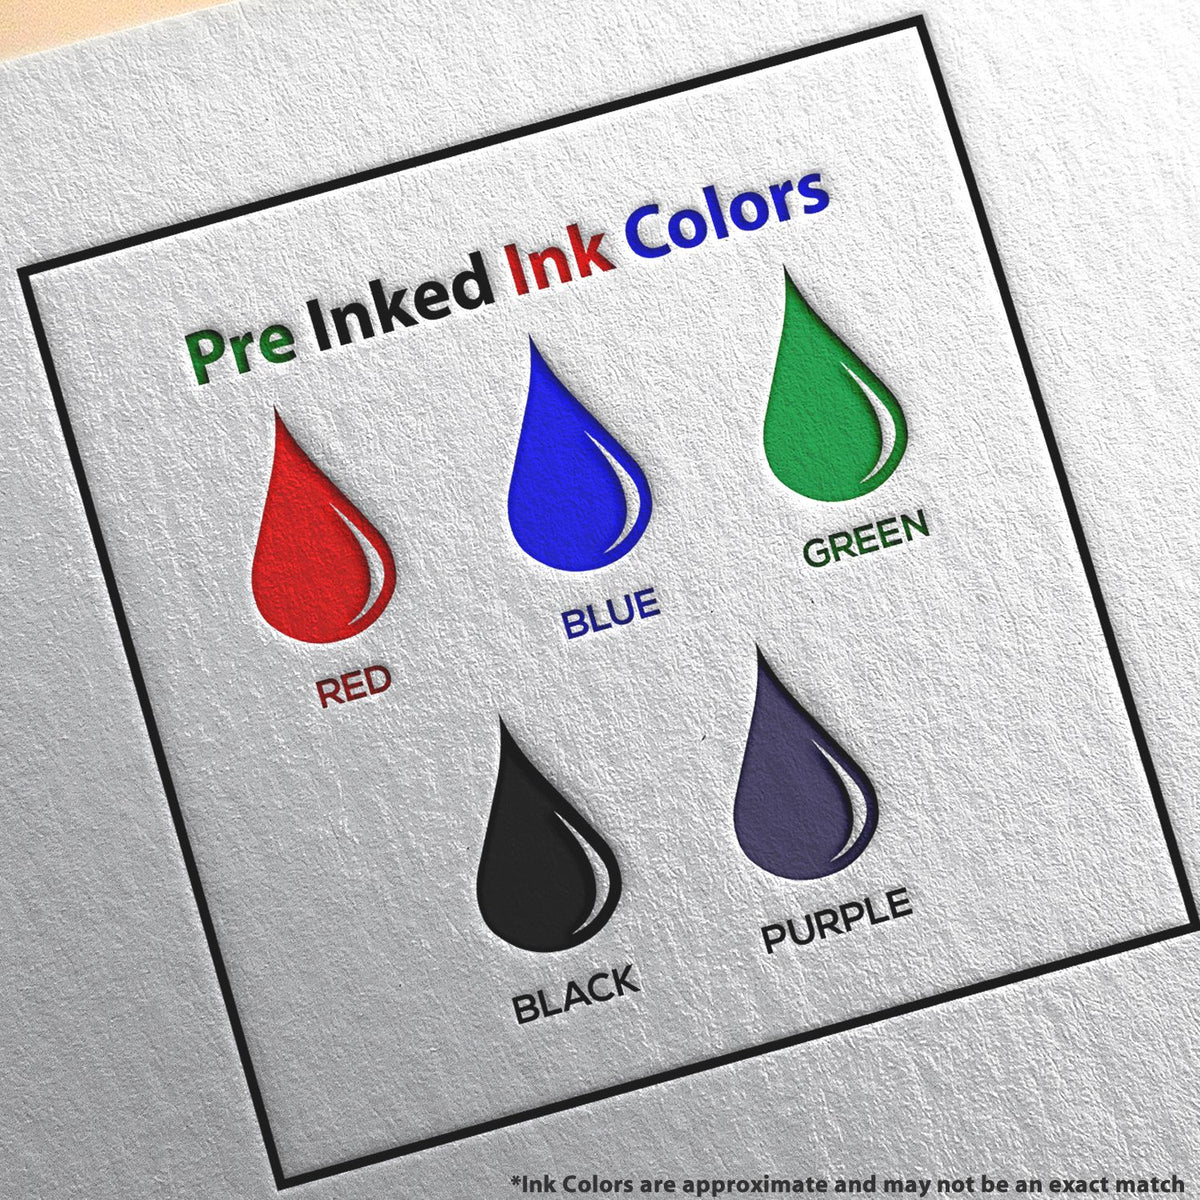 A picture showing the different ink colors or hues available for the Super Slim California Notary Public Stamp product.